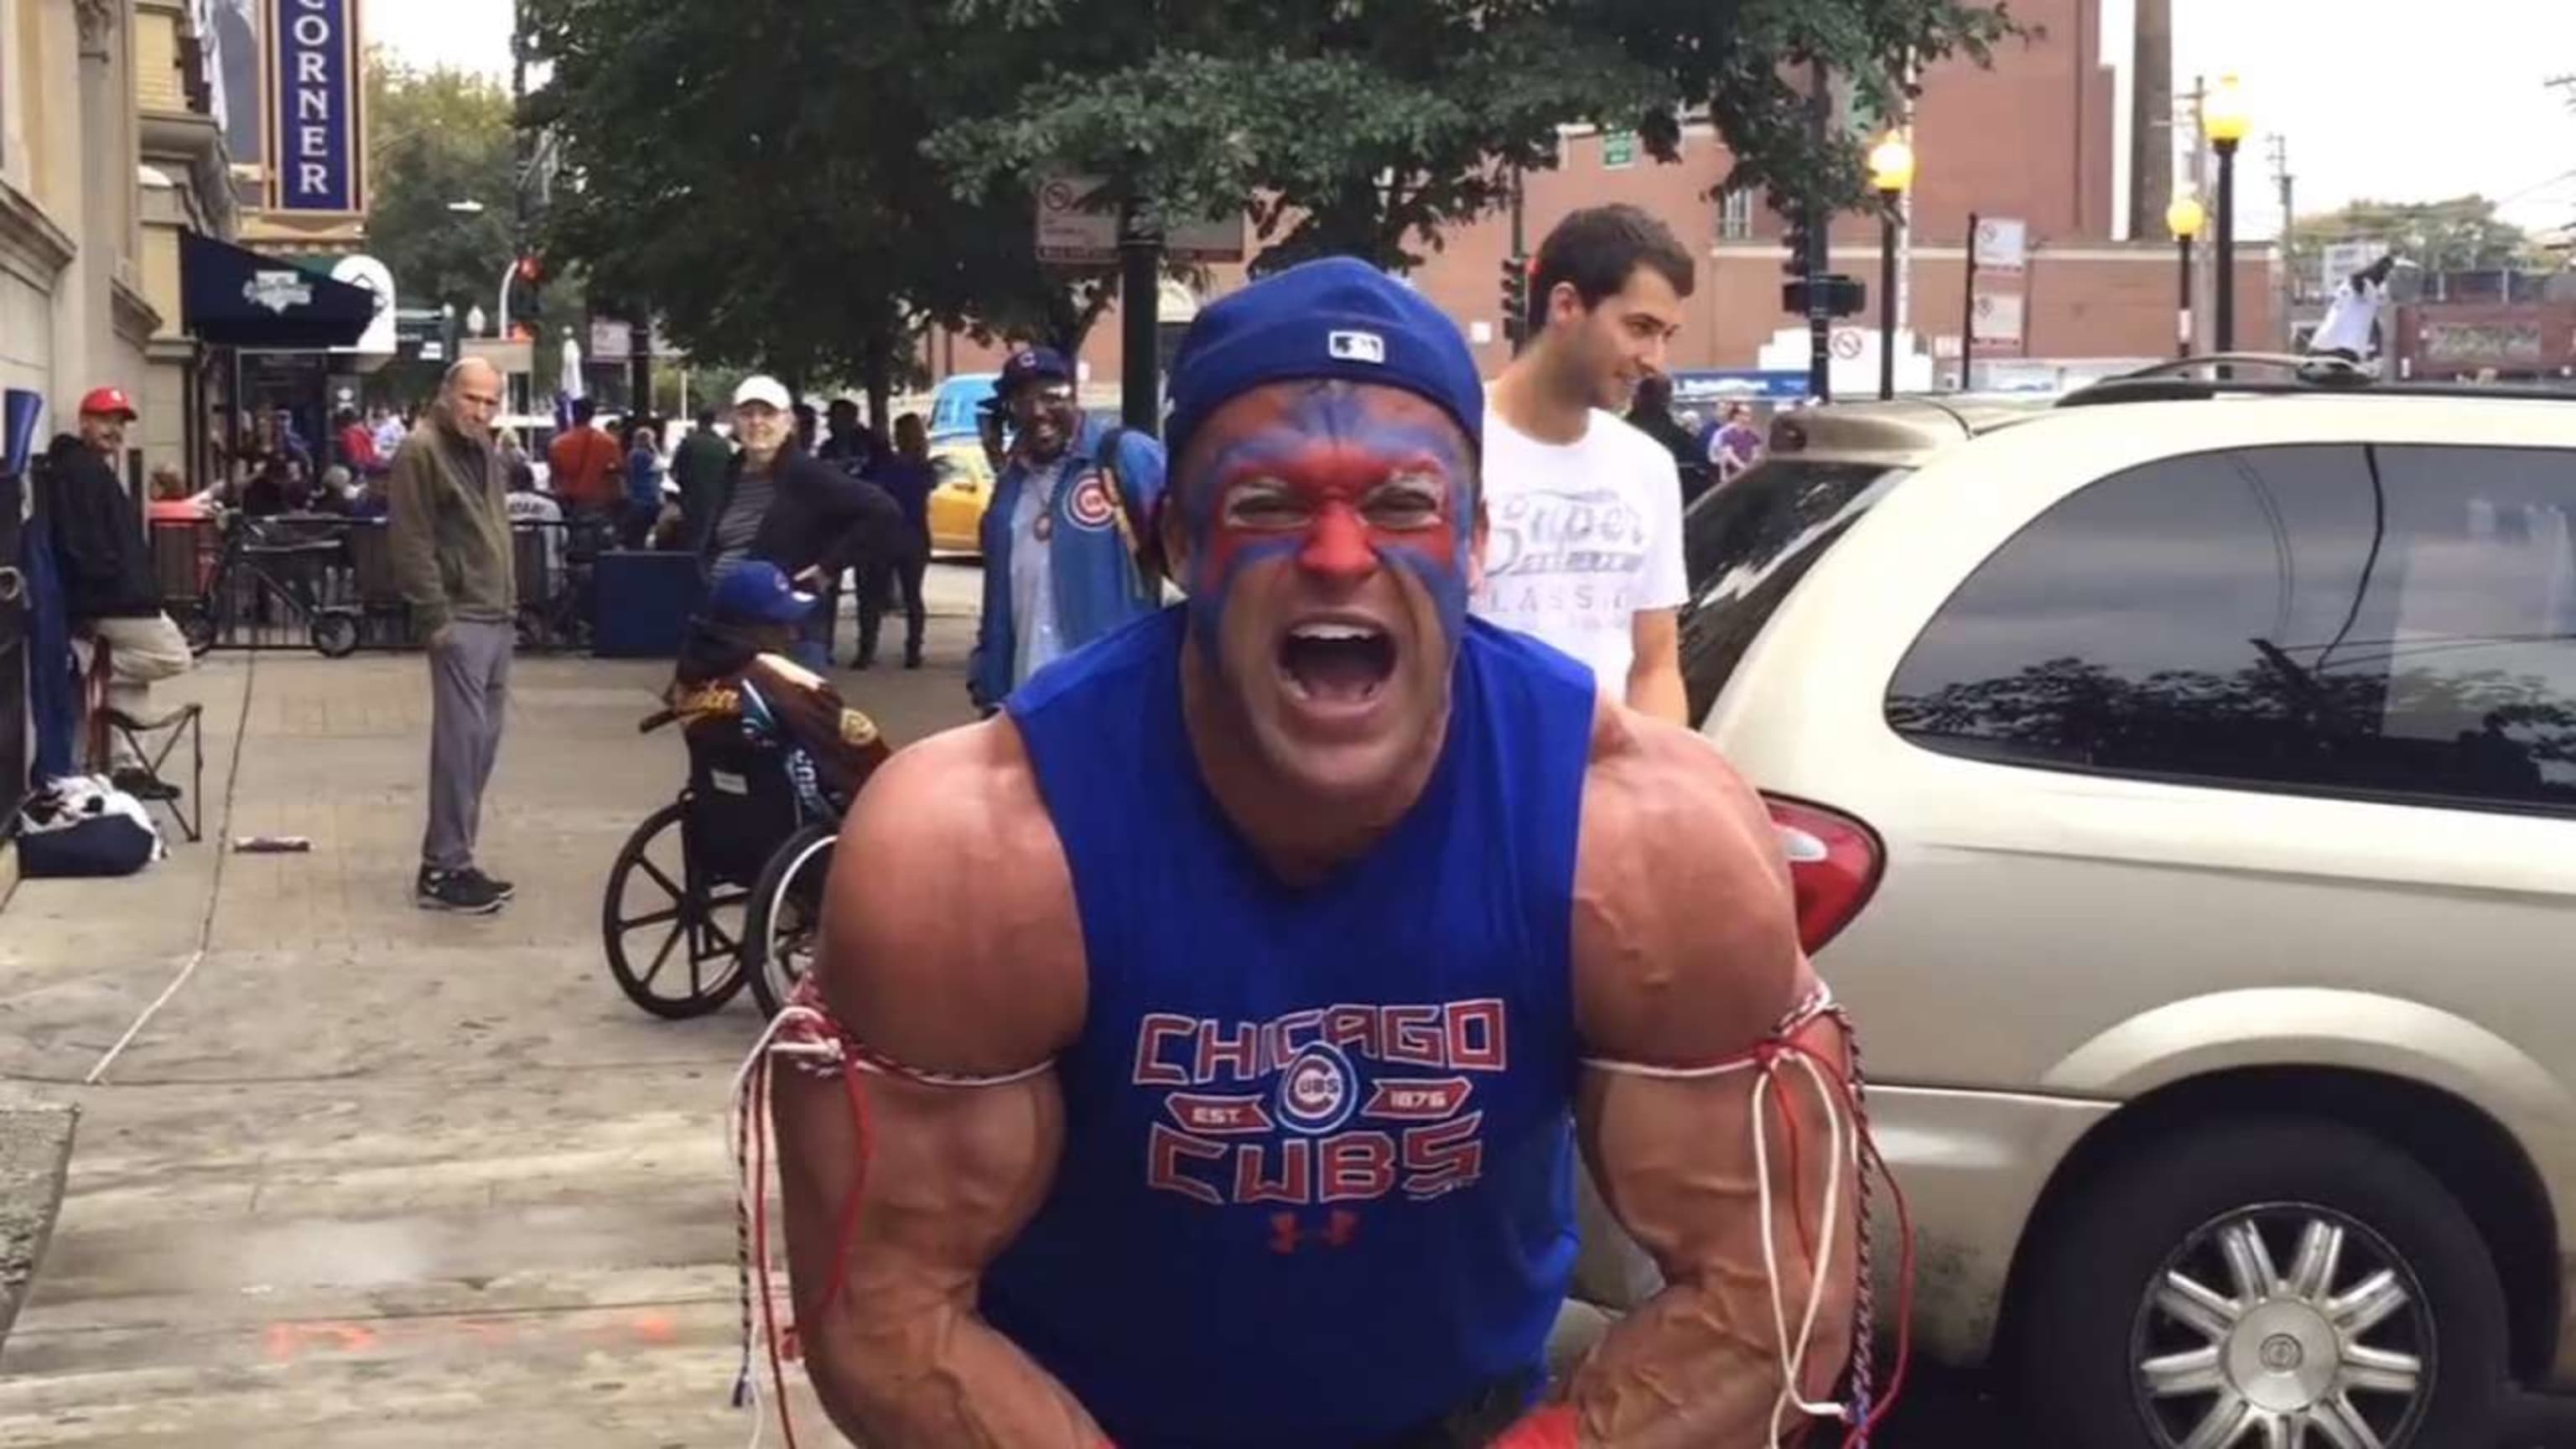 This bodybuilding fan would trade his enormous muscles for a Cubs